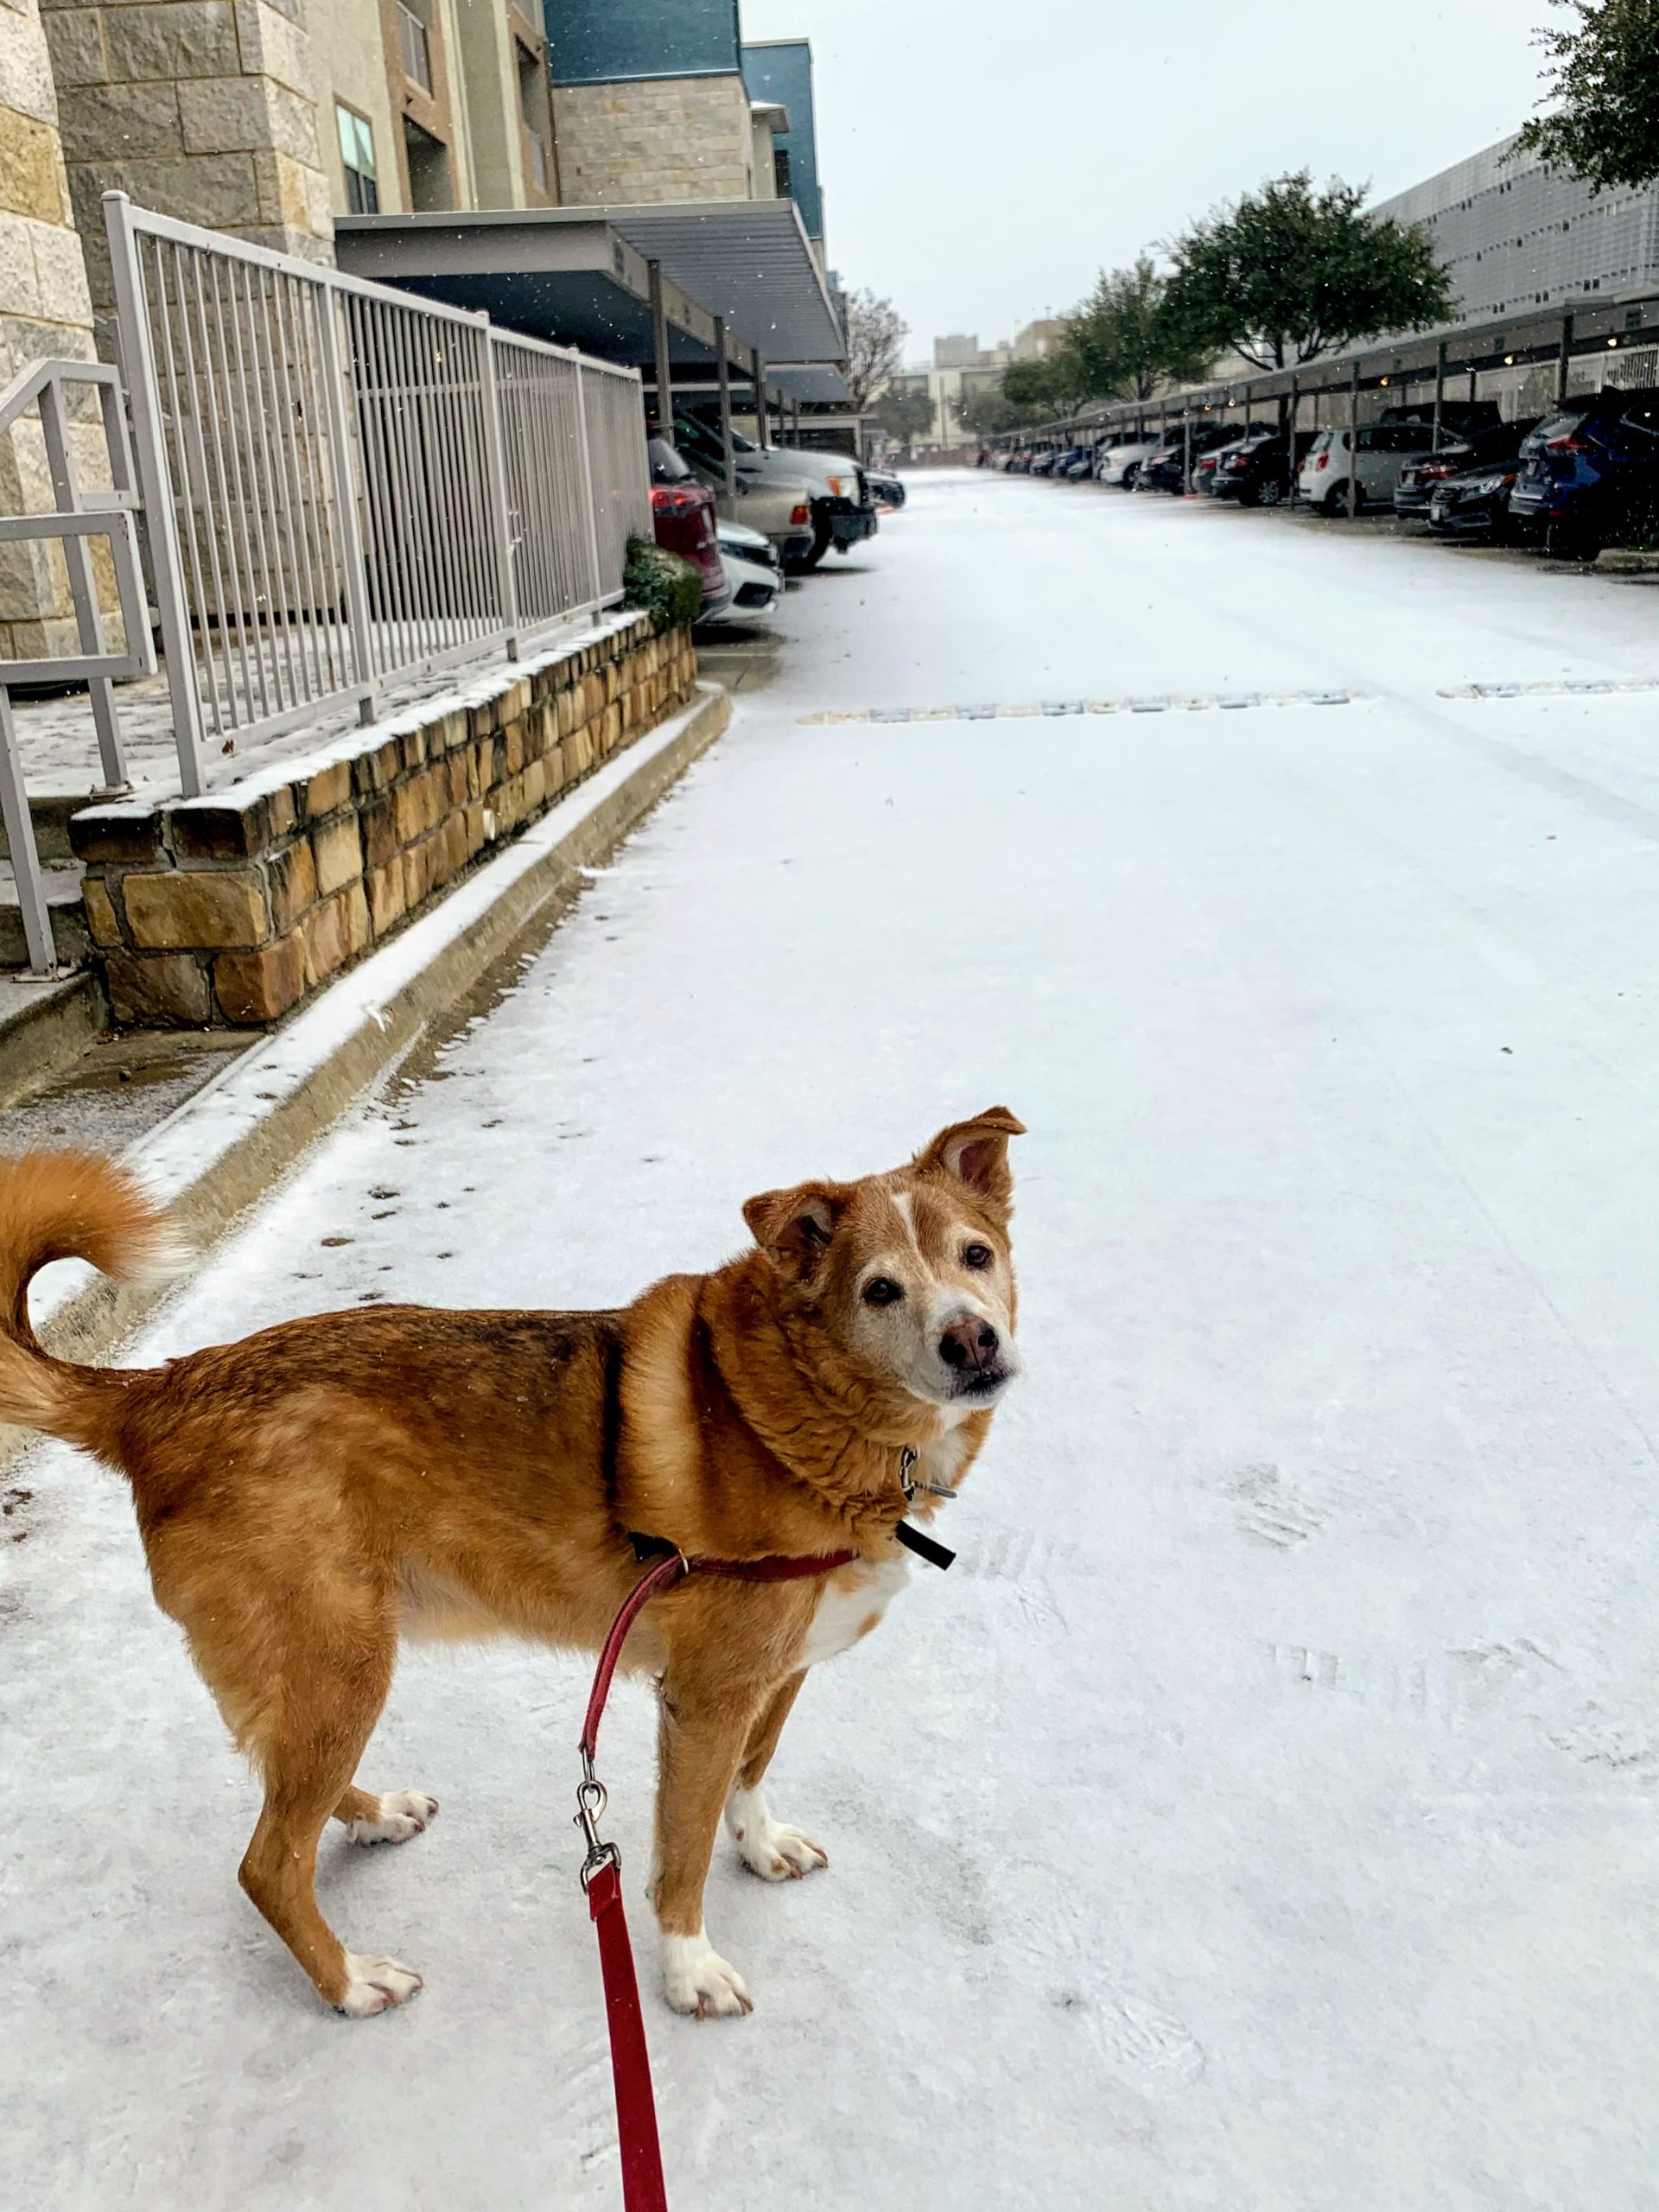 a dog standing on a snowy street